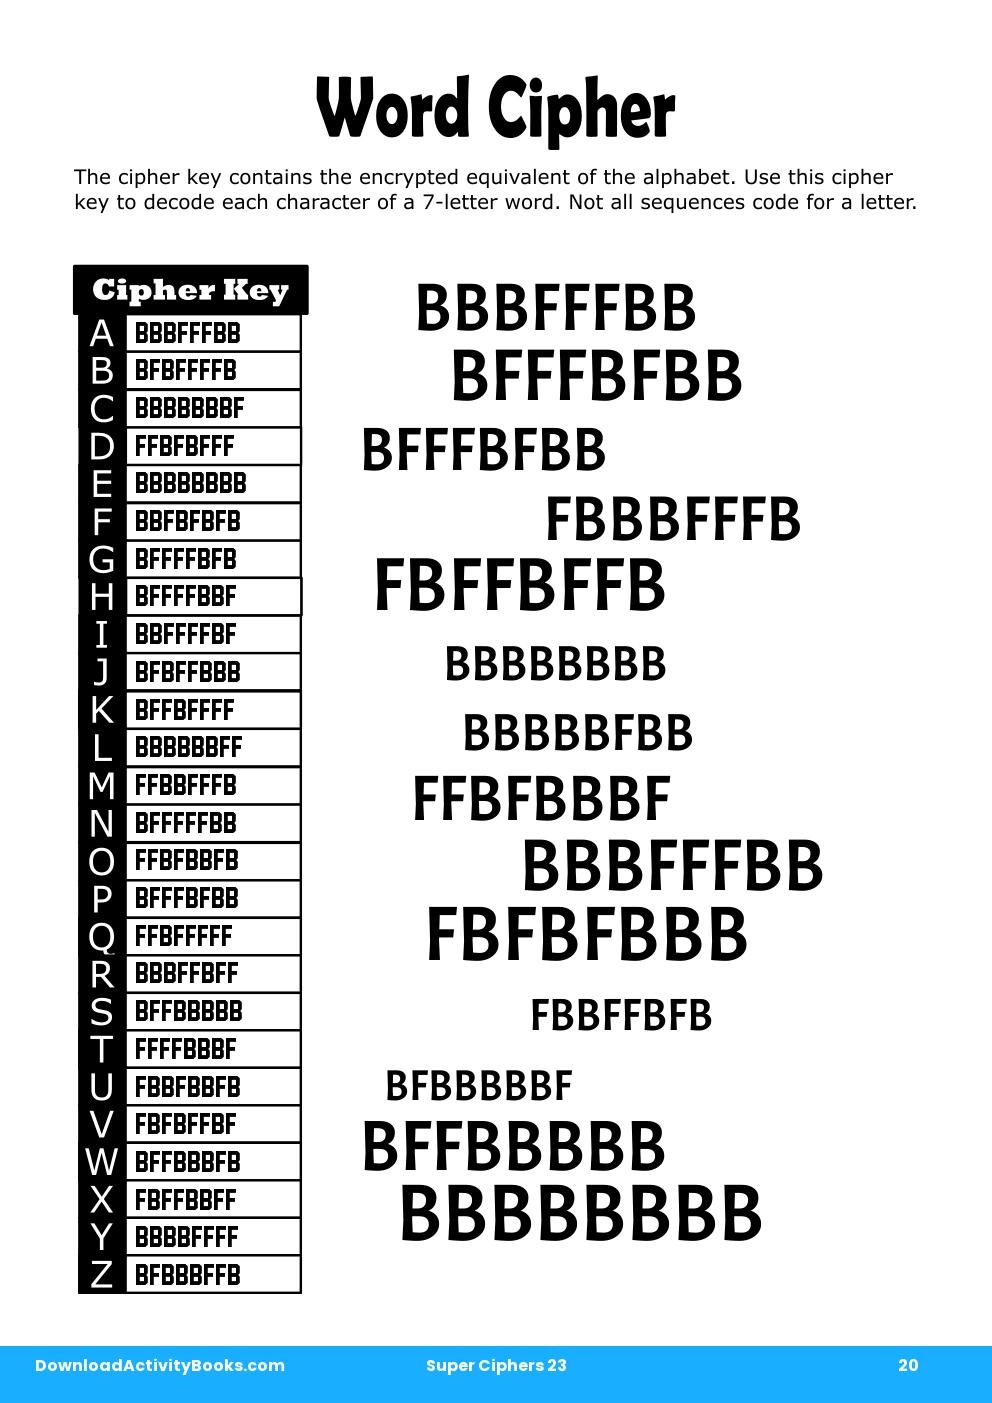 Word Cipher in Super Ciphers 23